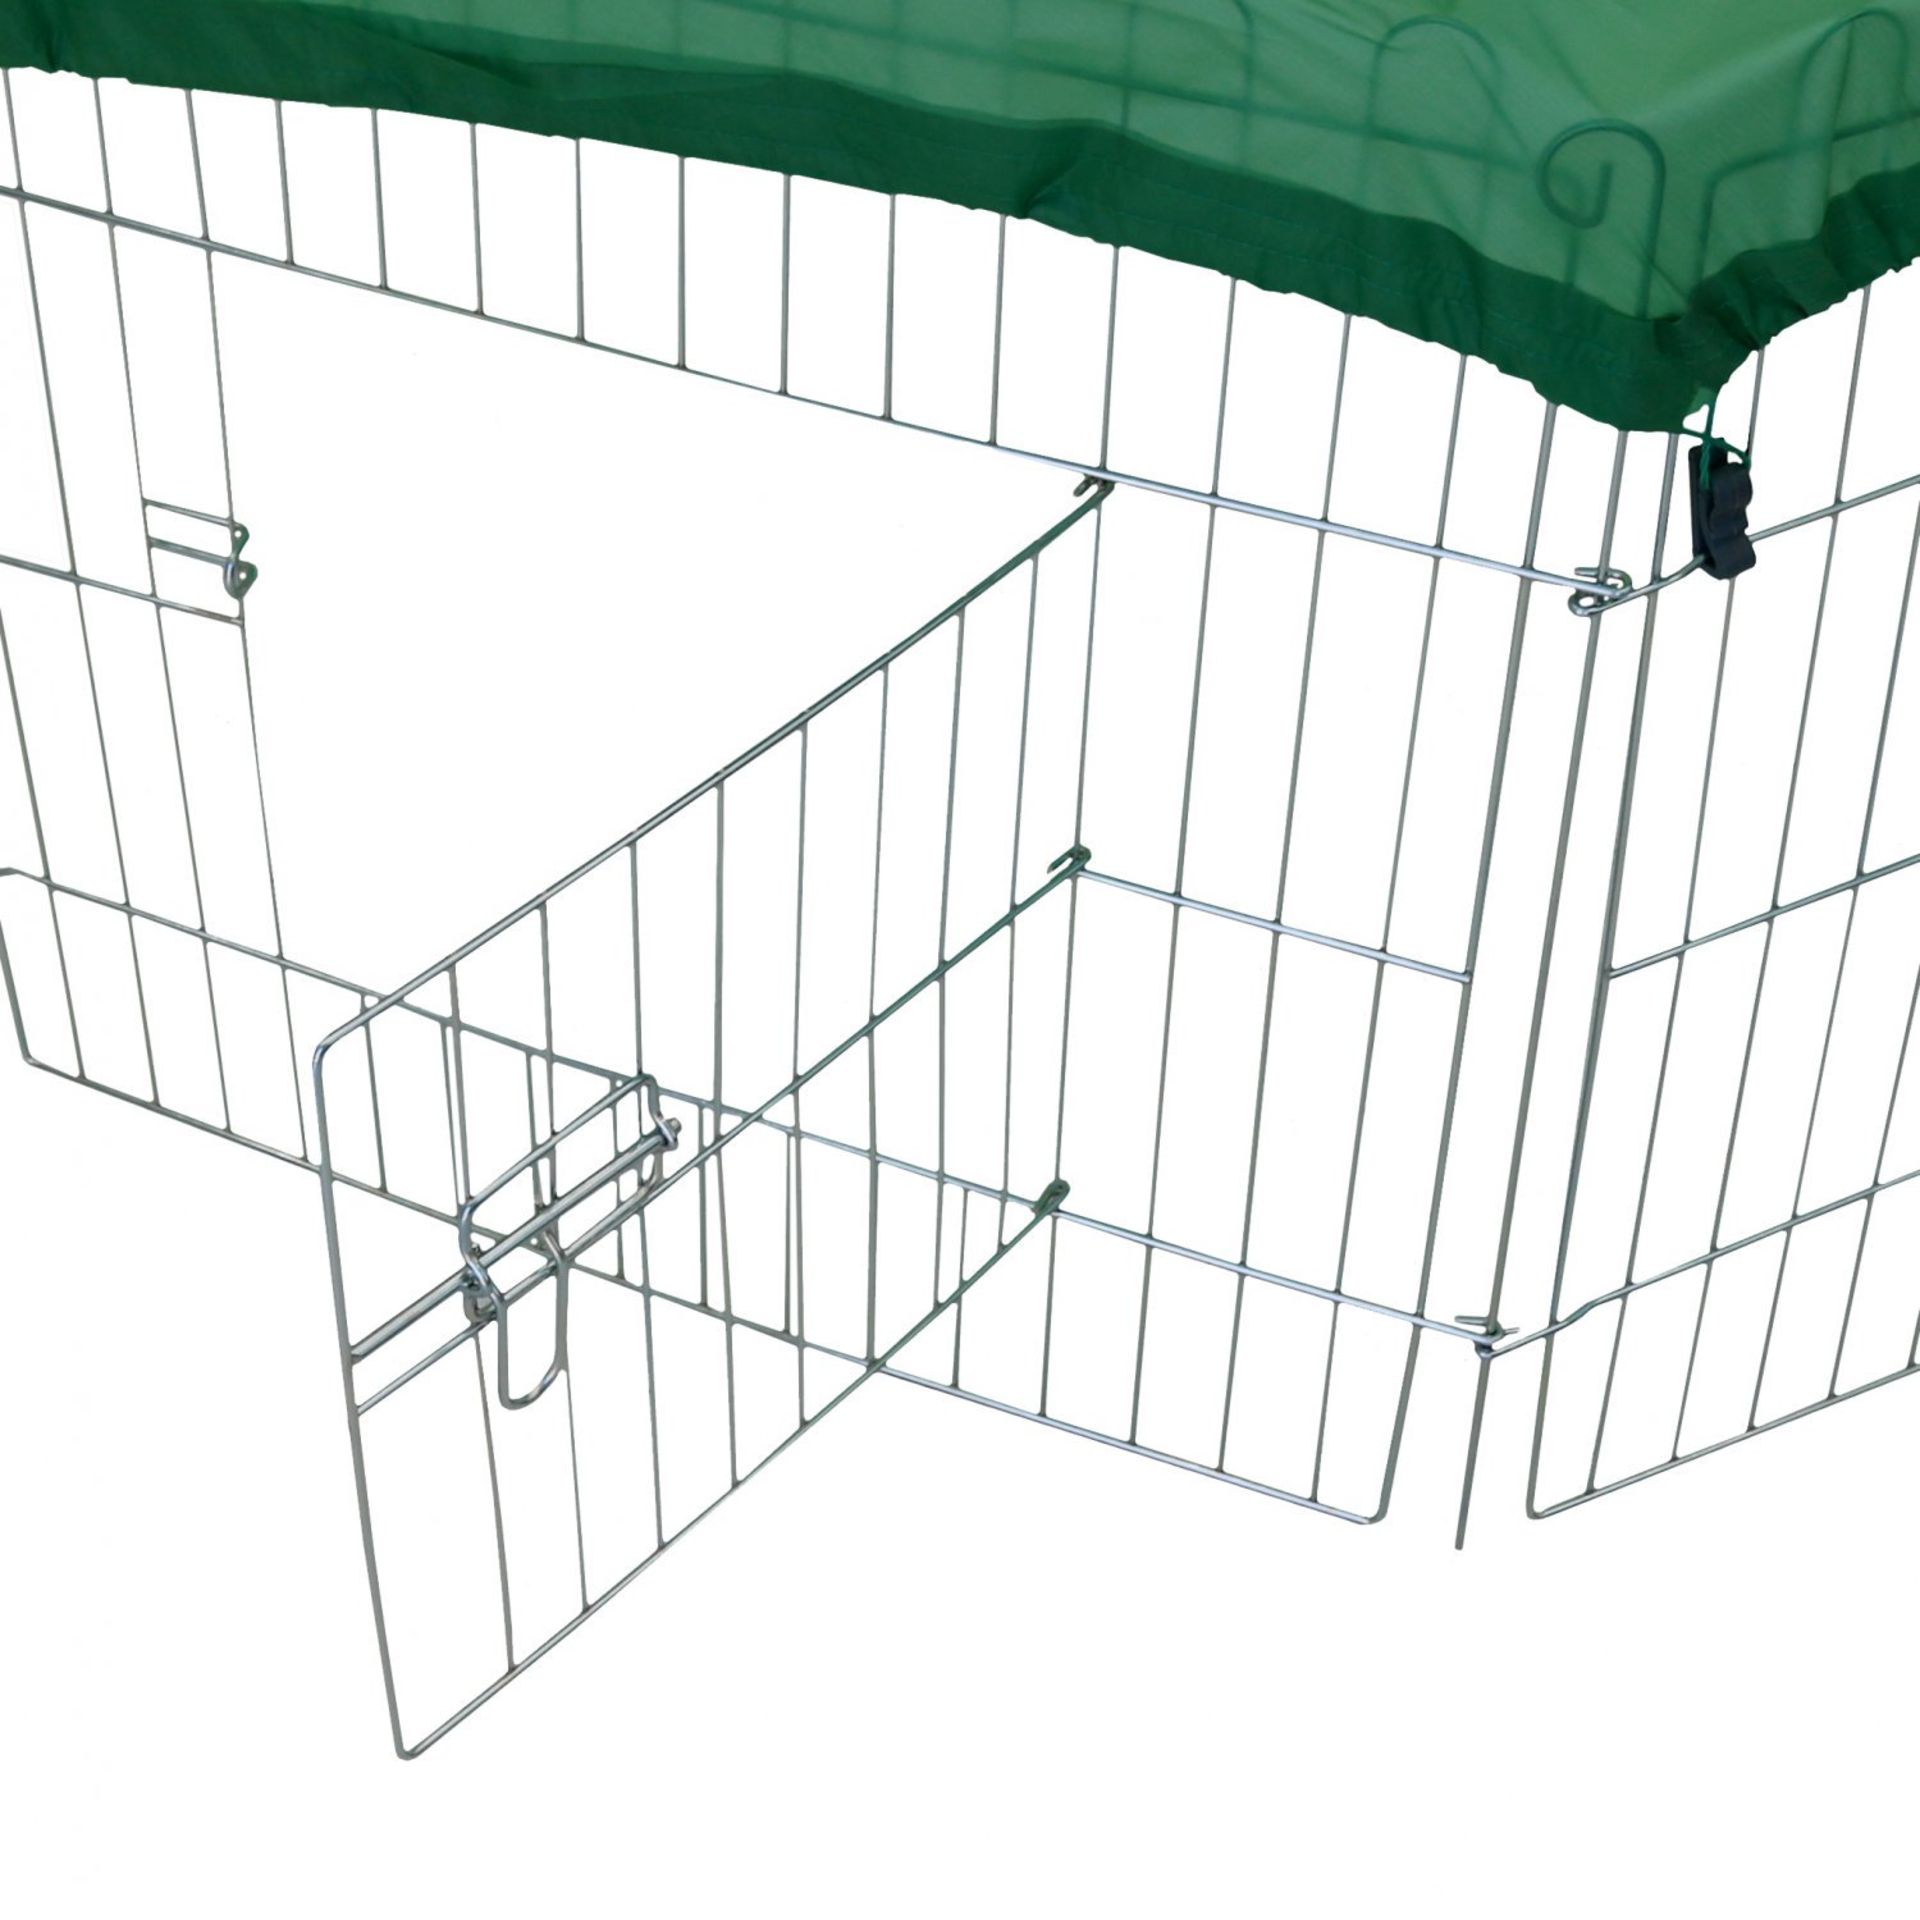 (LF120) 8 Panel Outdoor Rabbit Play Pen Run with Shade Safety Net High Quality Weatherproof St... - Image 2 of 2